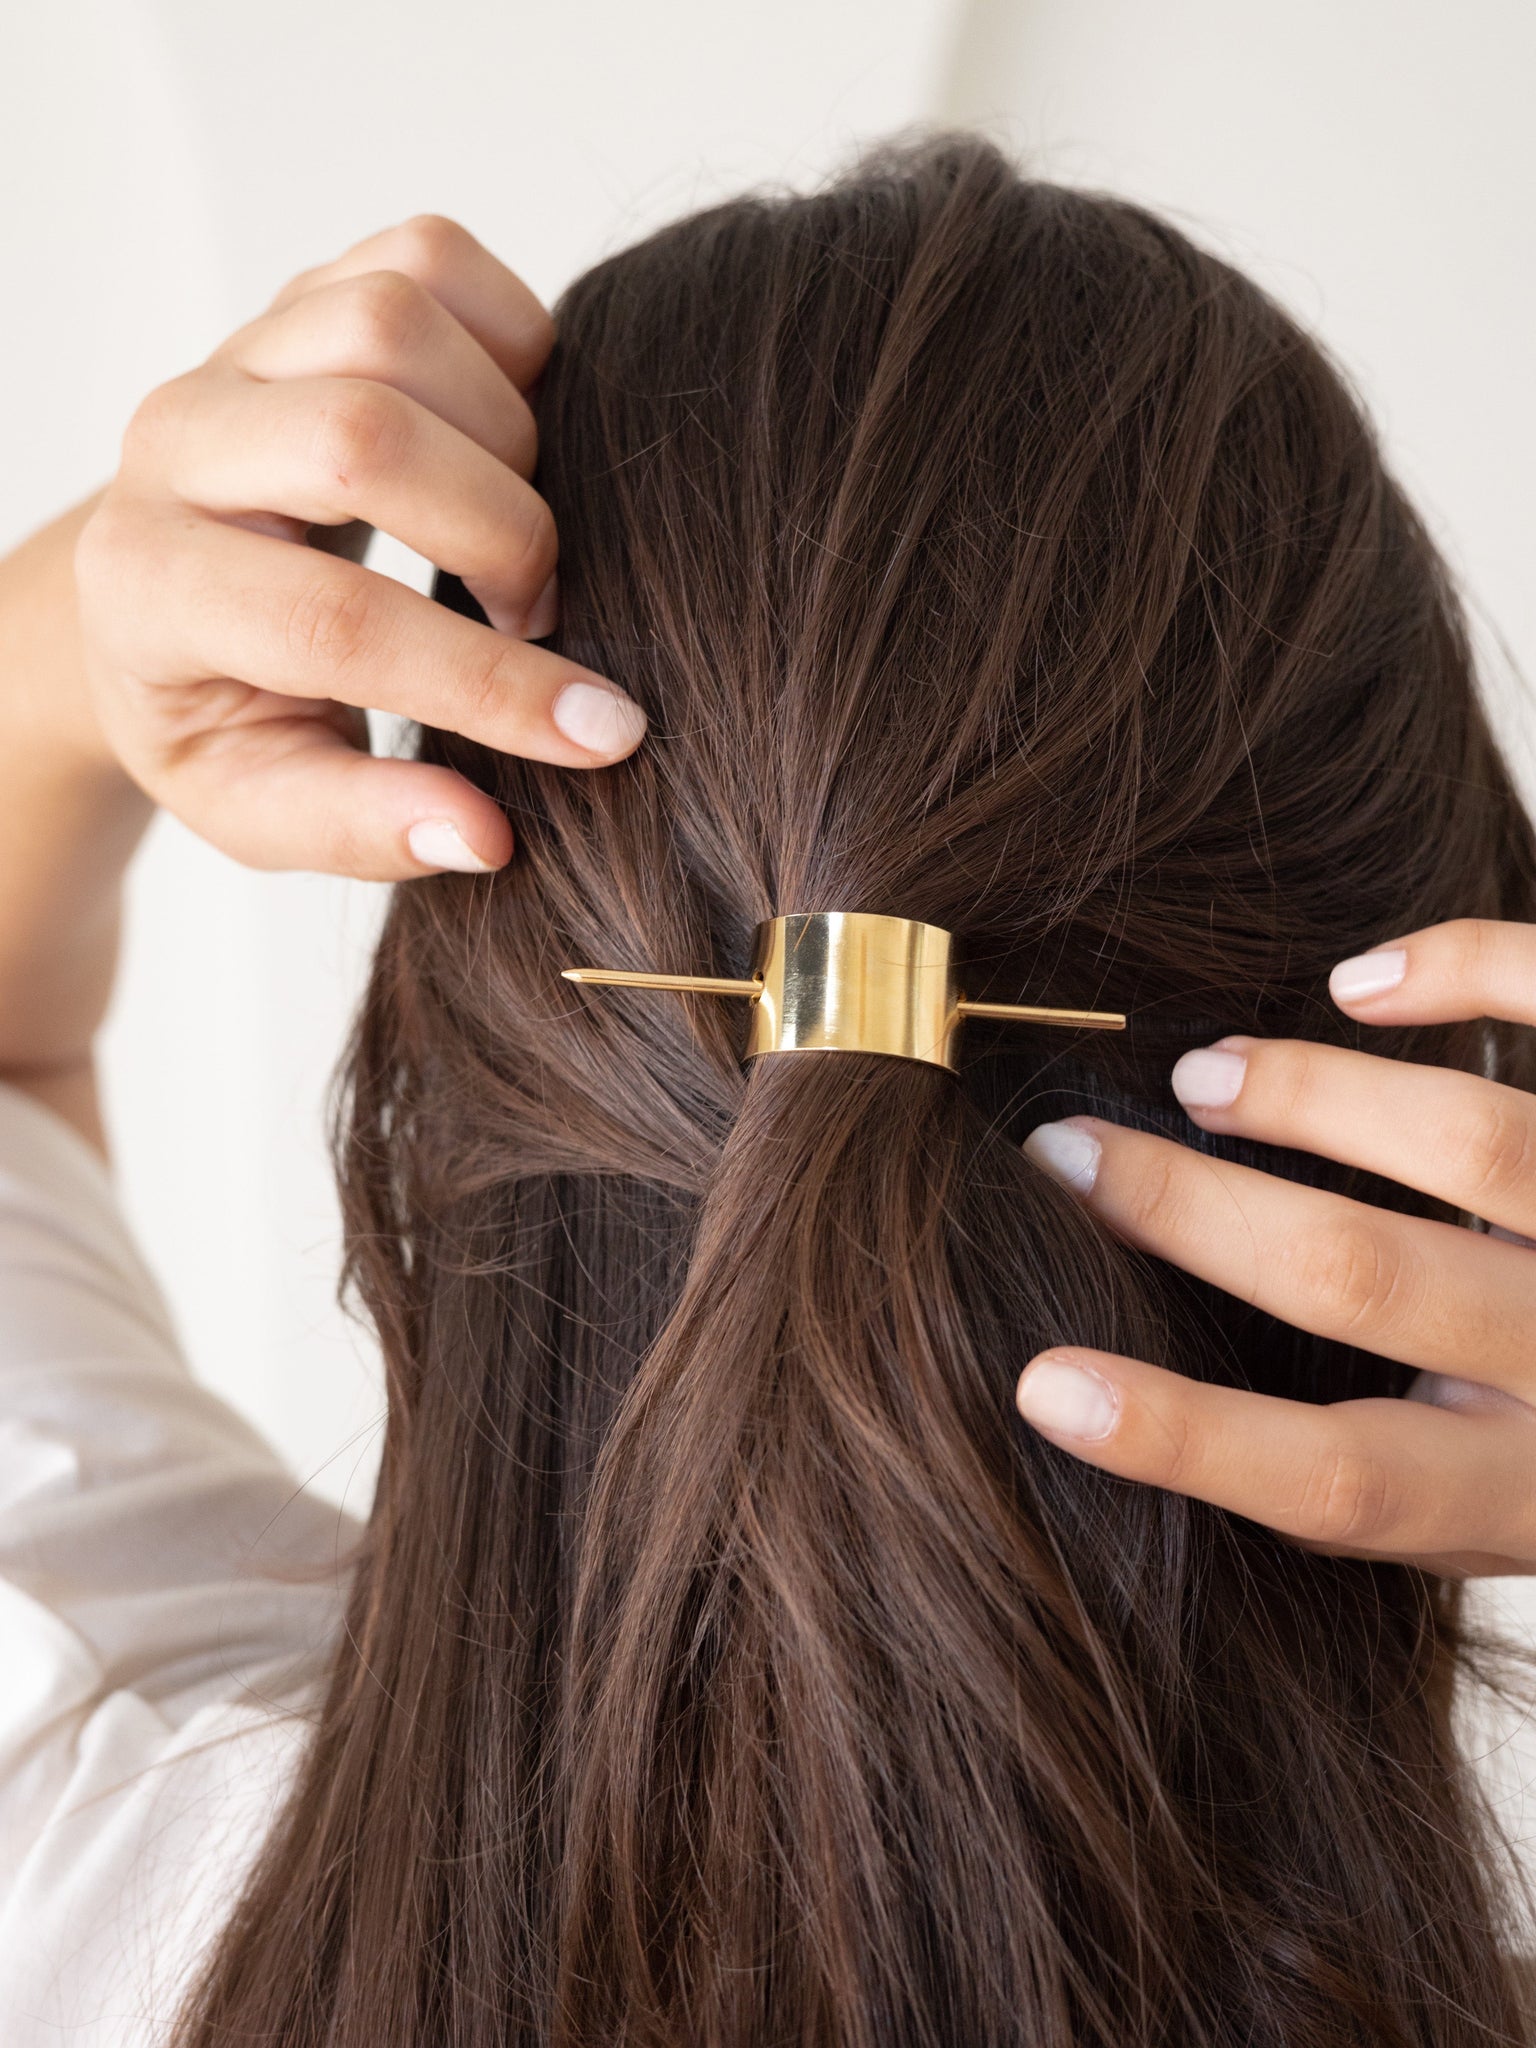 A woman is combing her hair with a Brushed Arch Hair Pin.